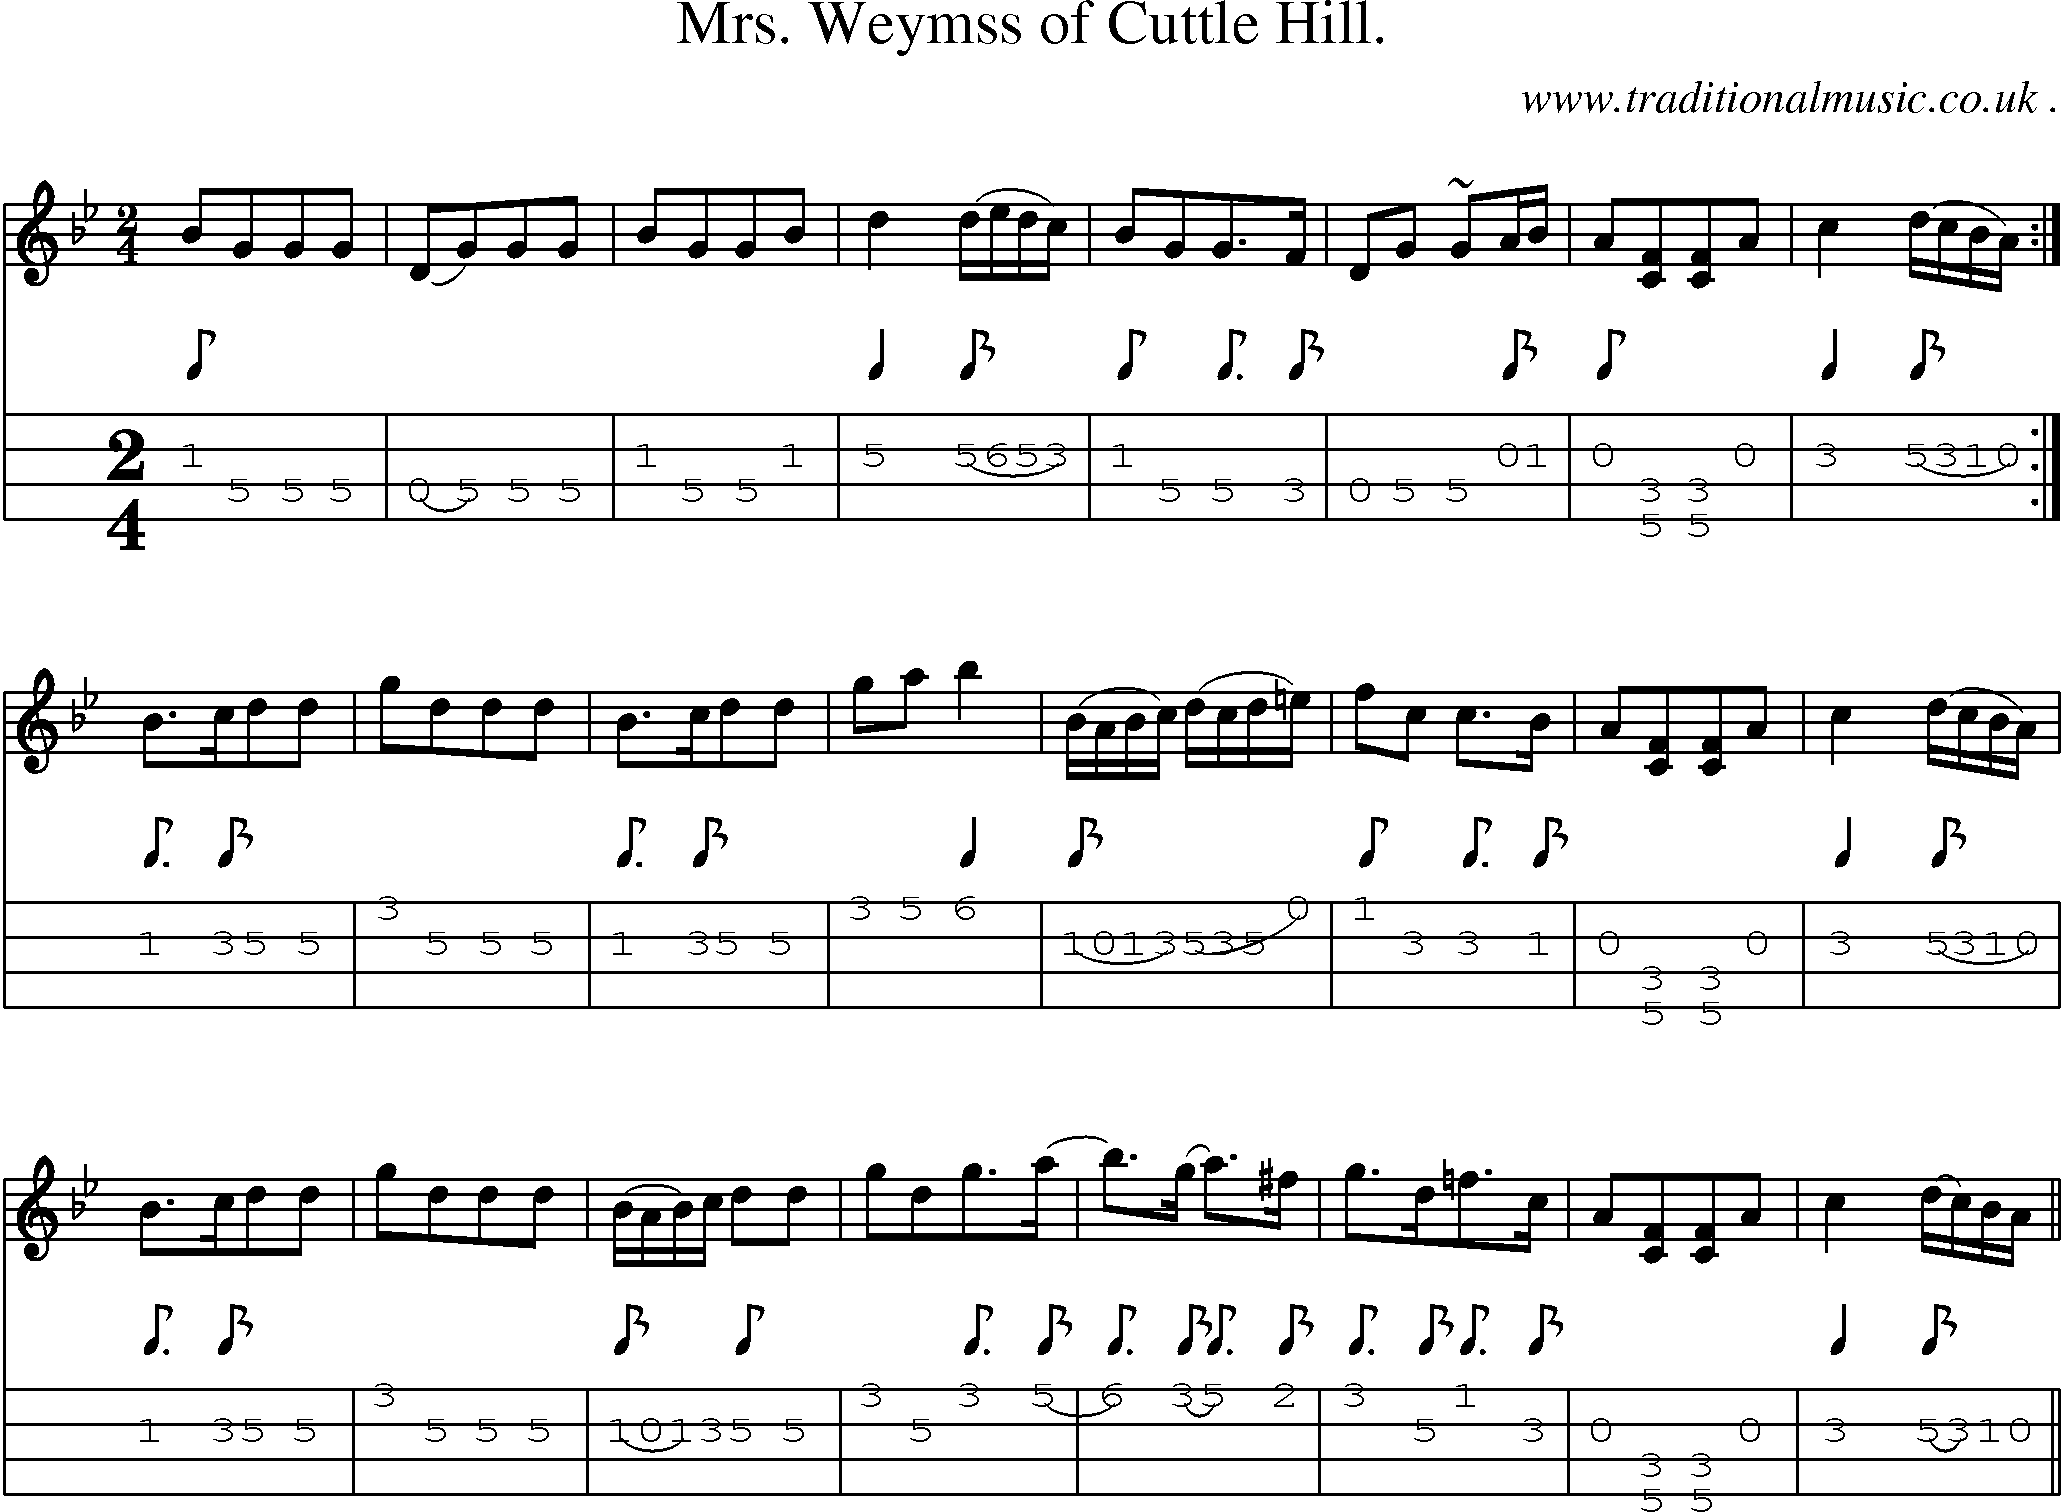 Sheet-music  score, Chords and Mandolin Tabs for Mrs Weymss Of Cuttle Hill